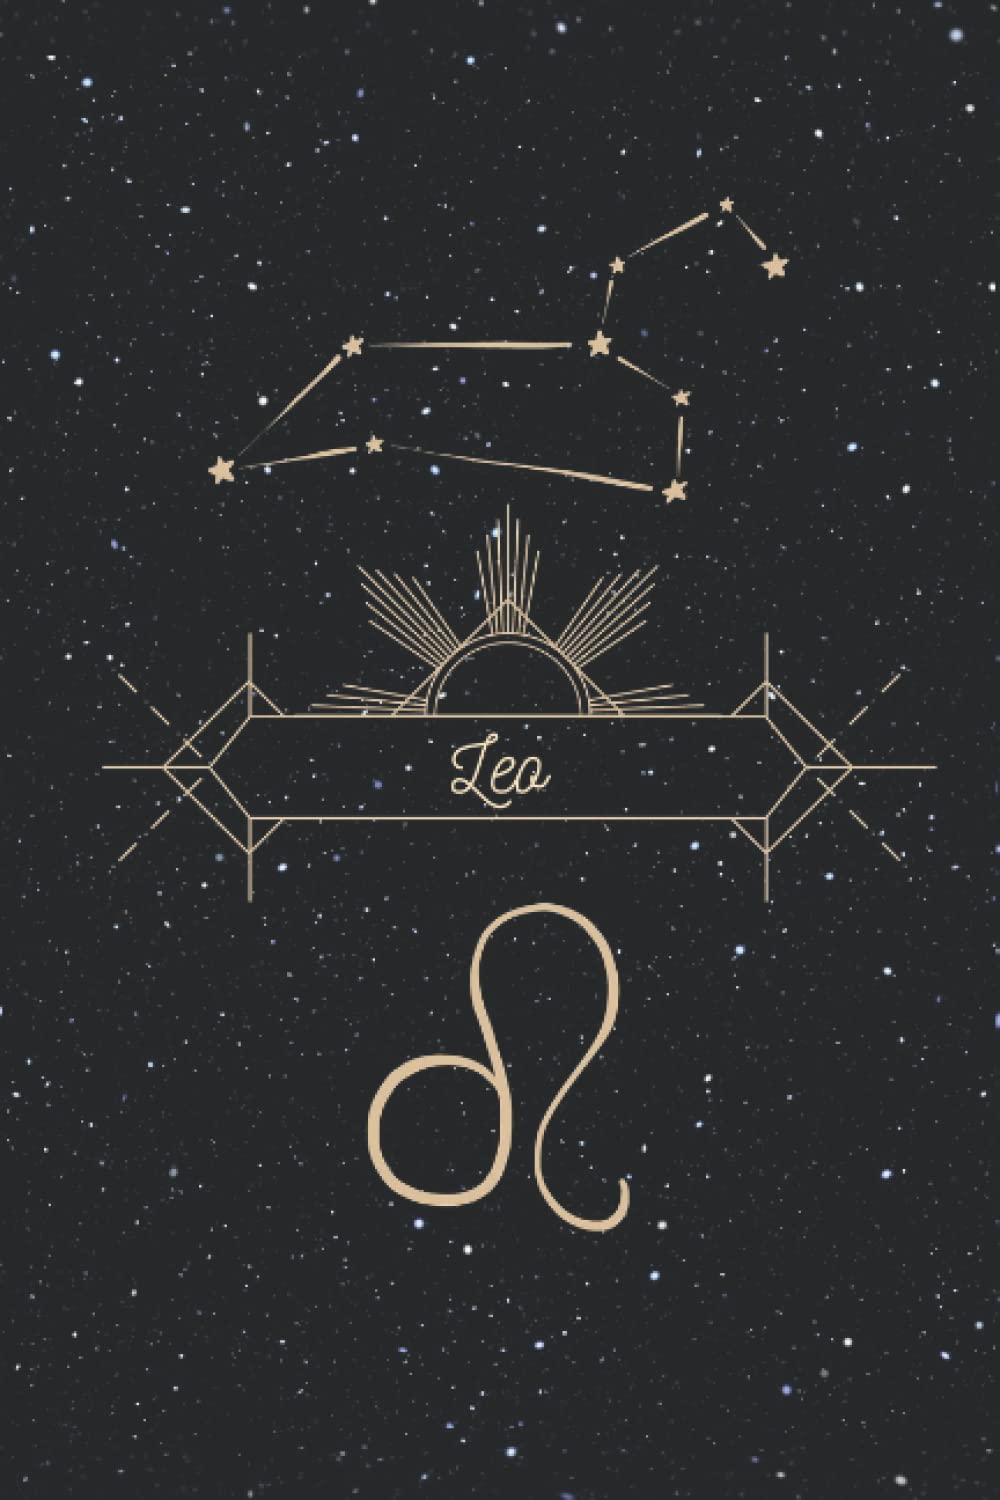 A gold and black sign with the zodiac symbol - Leo